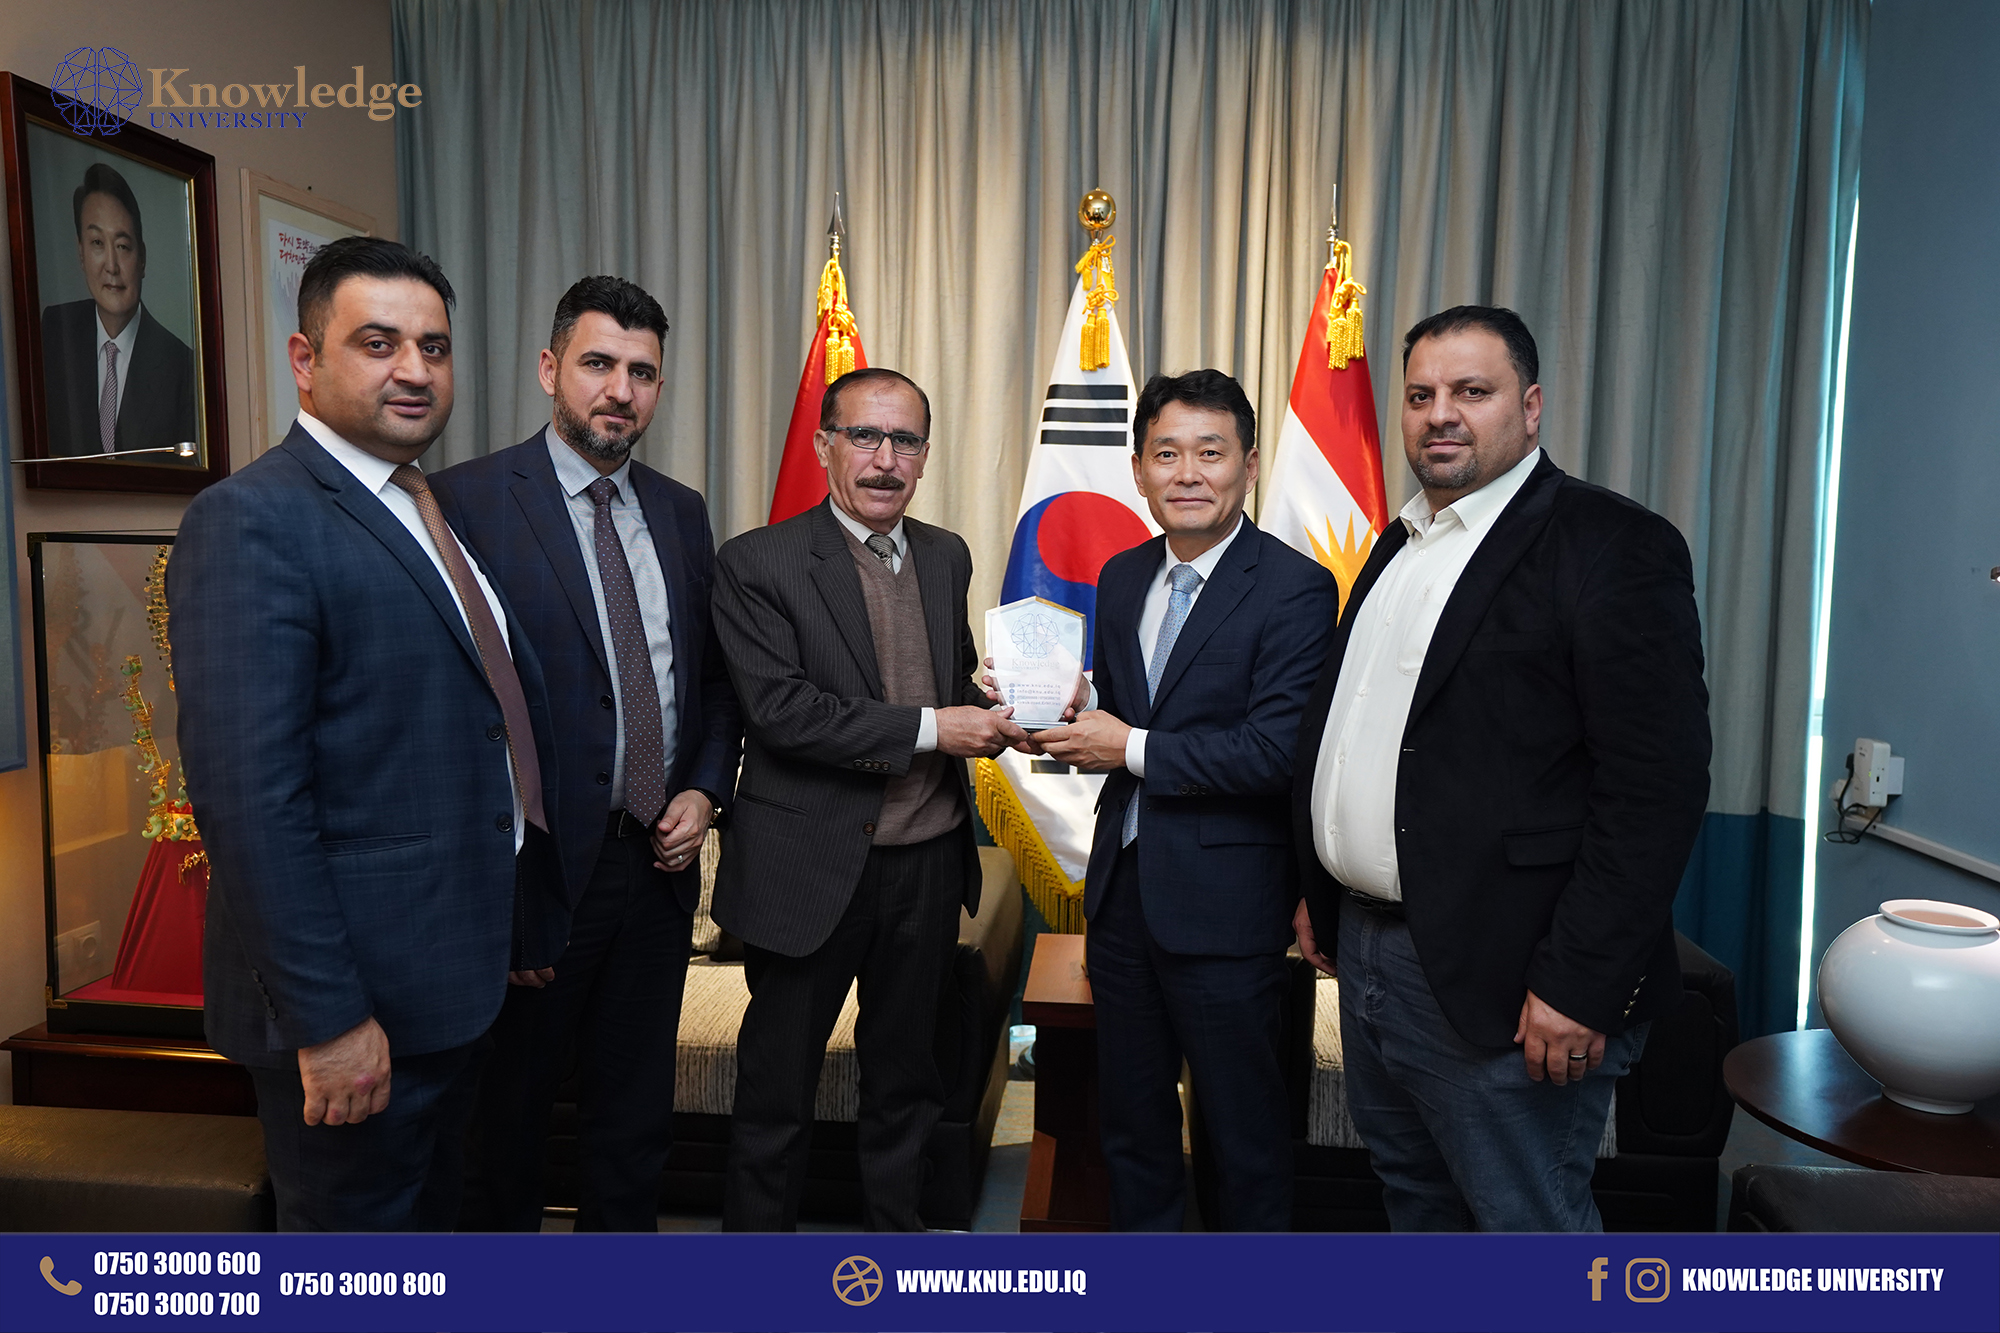 Knowledge University Delegation Presents Honorary Award to South Korean Consulate General in Erbil for Education Collaboration